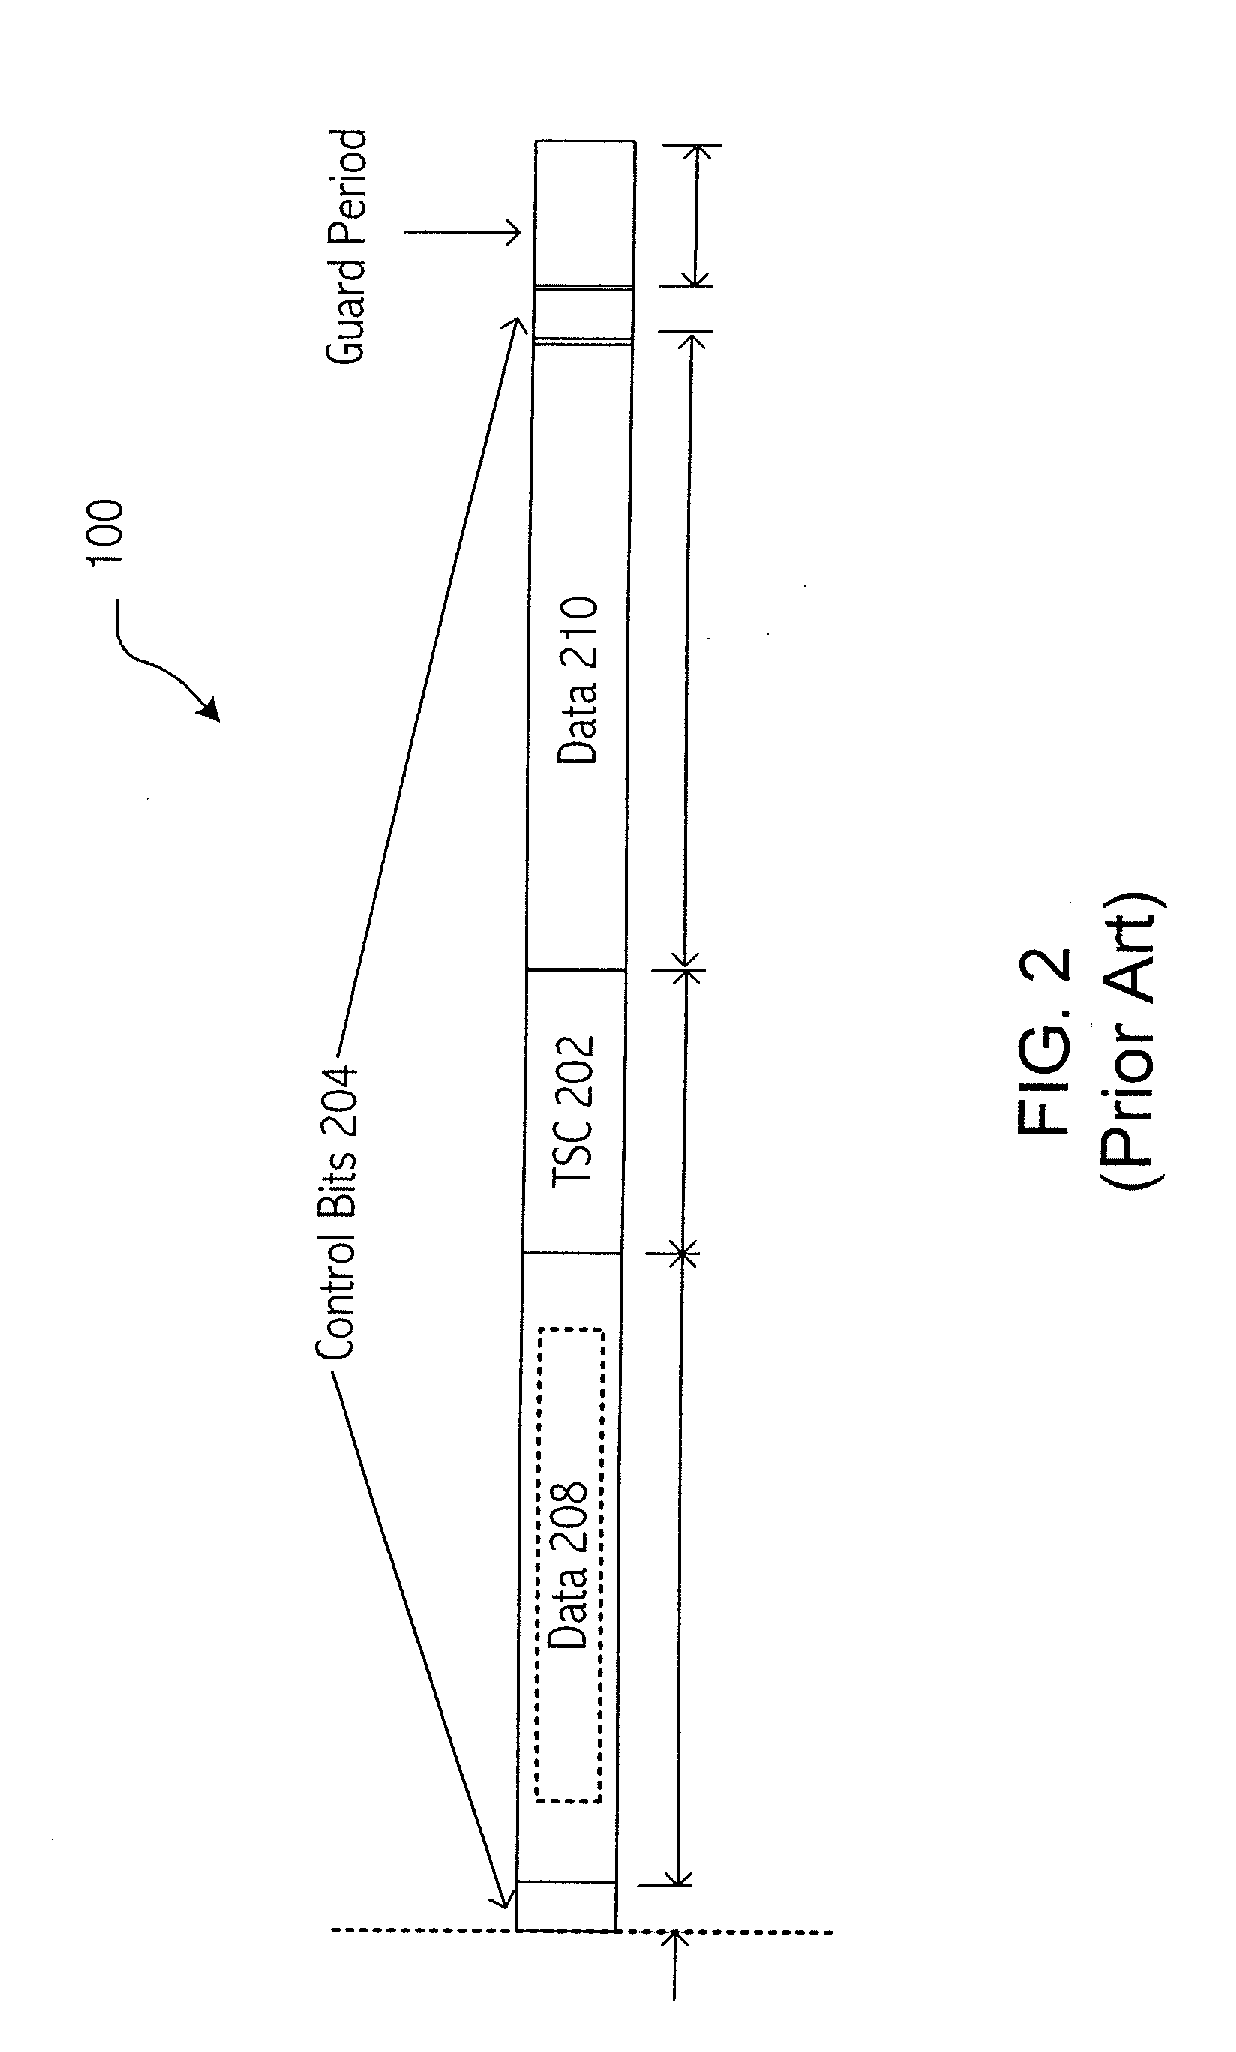 Systems and methods for interference cancellation in a radio receiver system